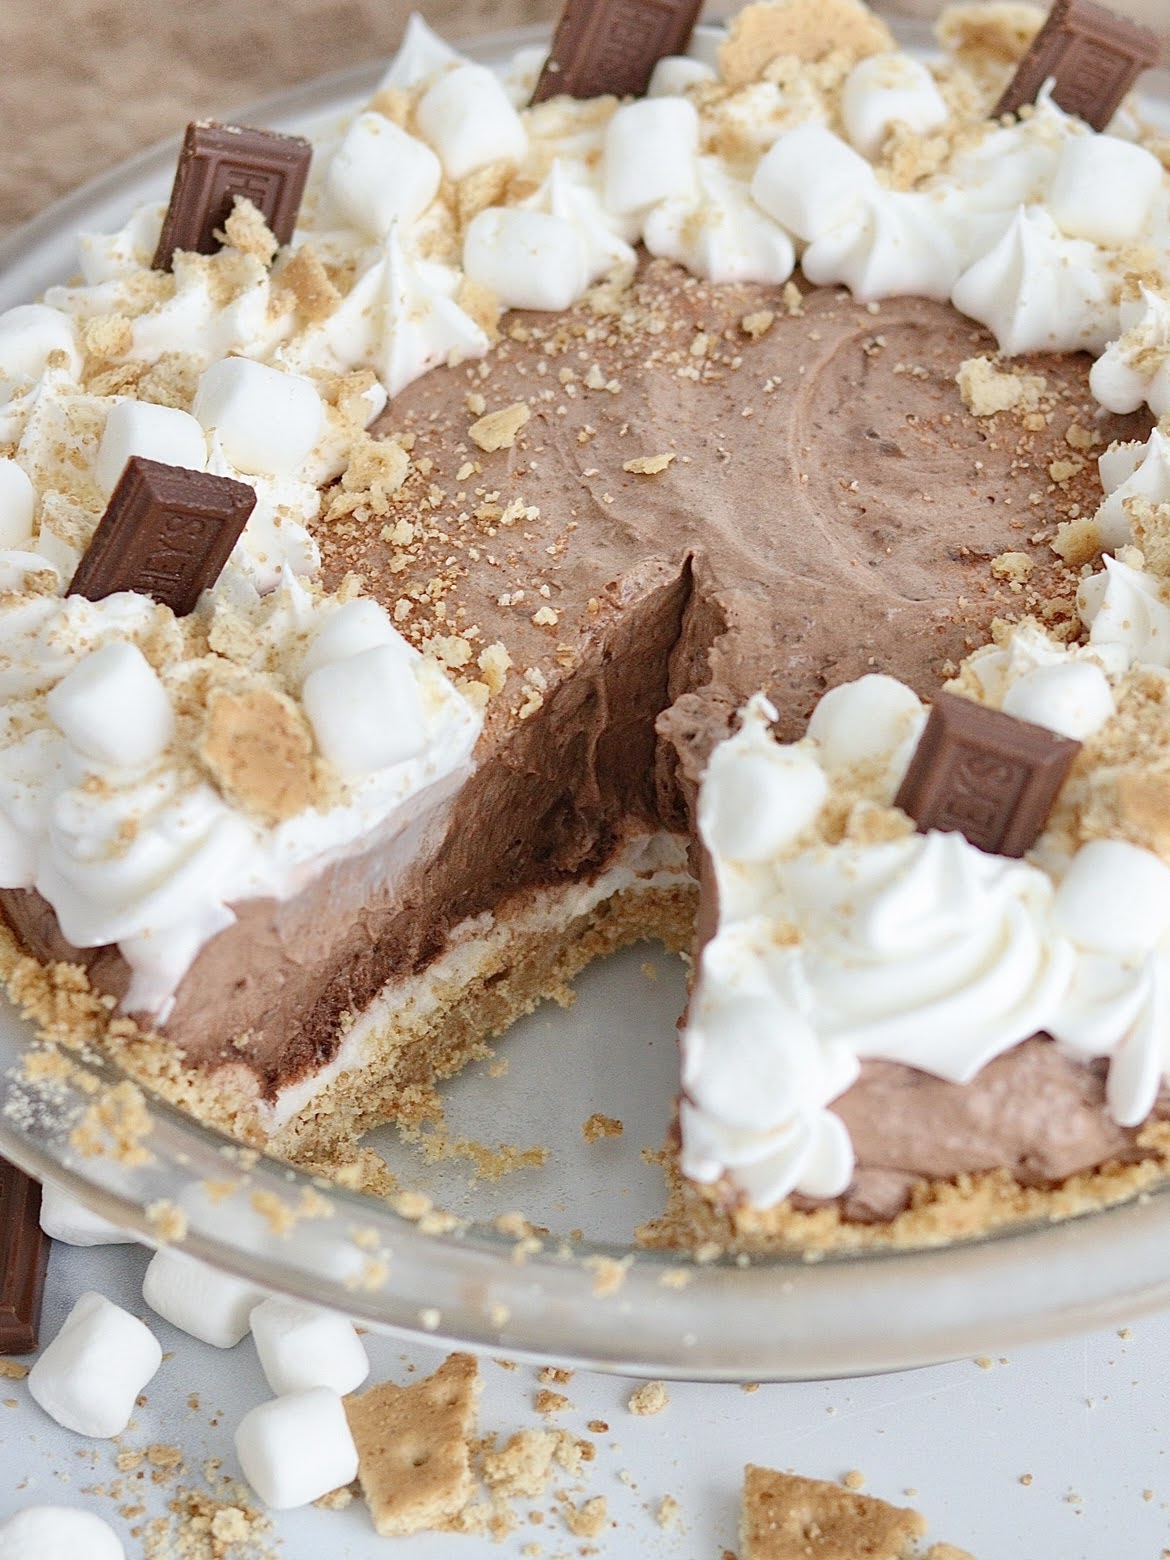 S'mores cream pie with a slice taken out of it, showing the marshmallow layer and graham cracker crust.